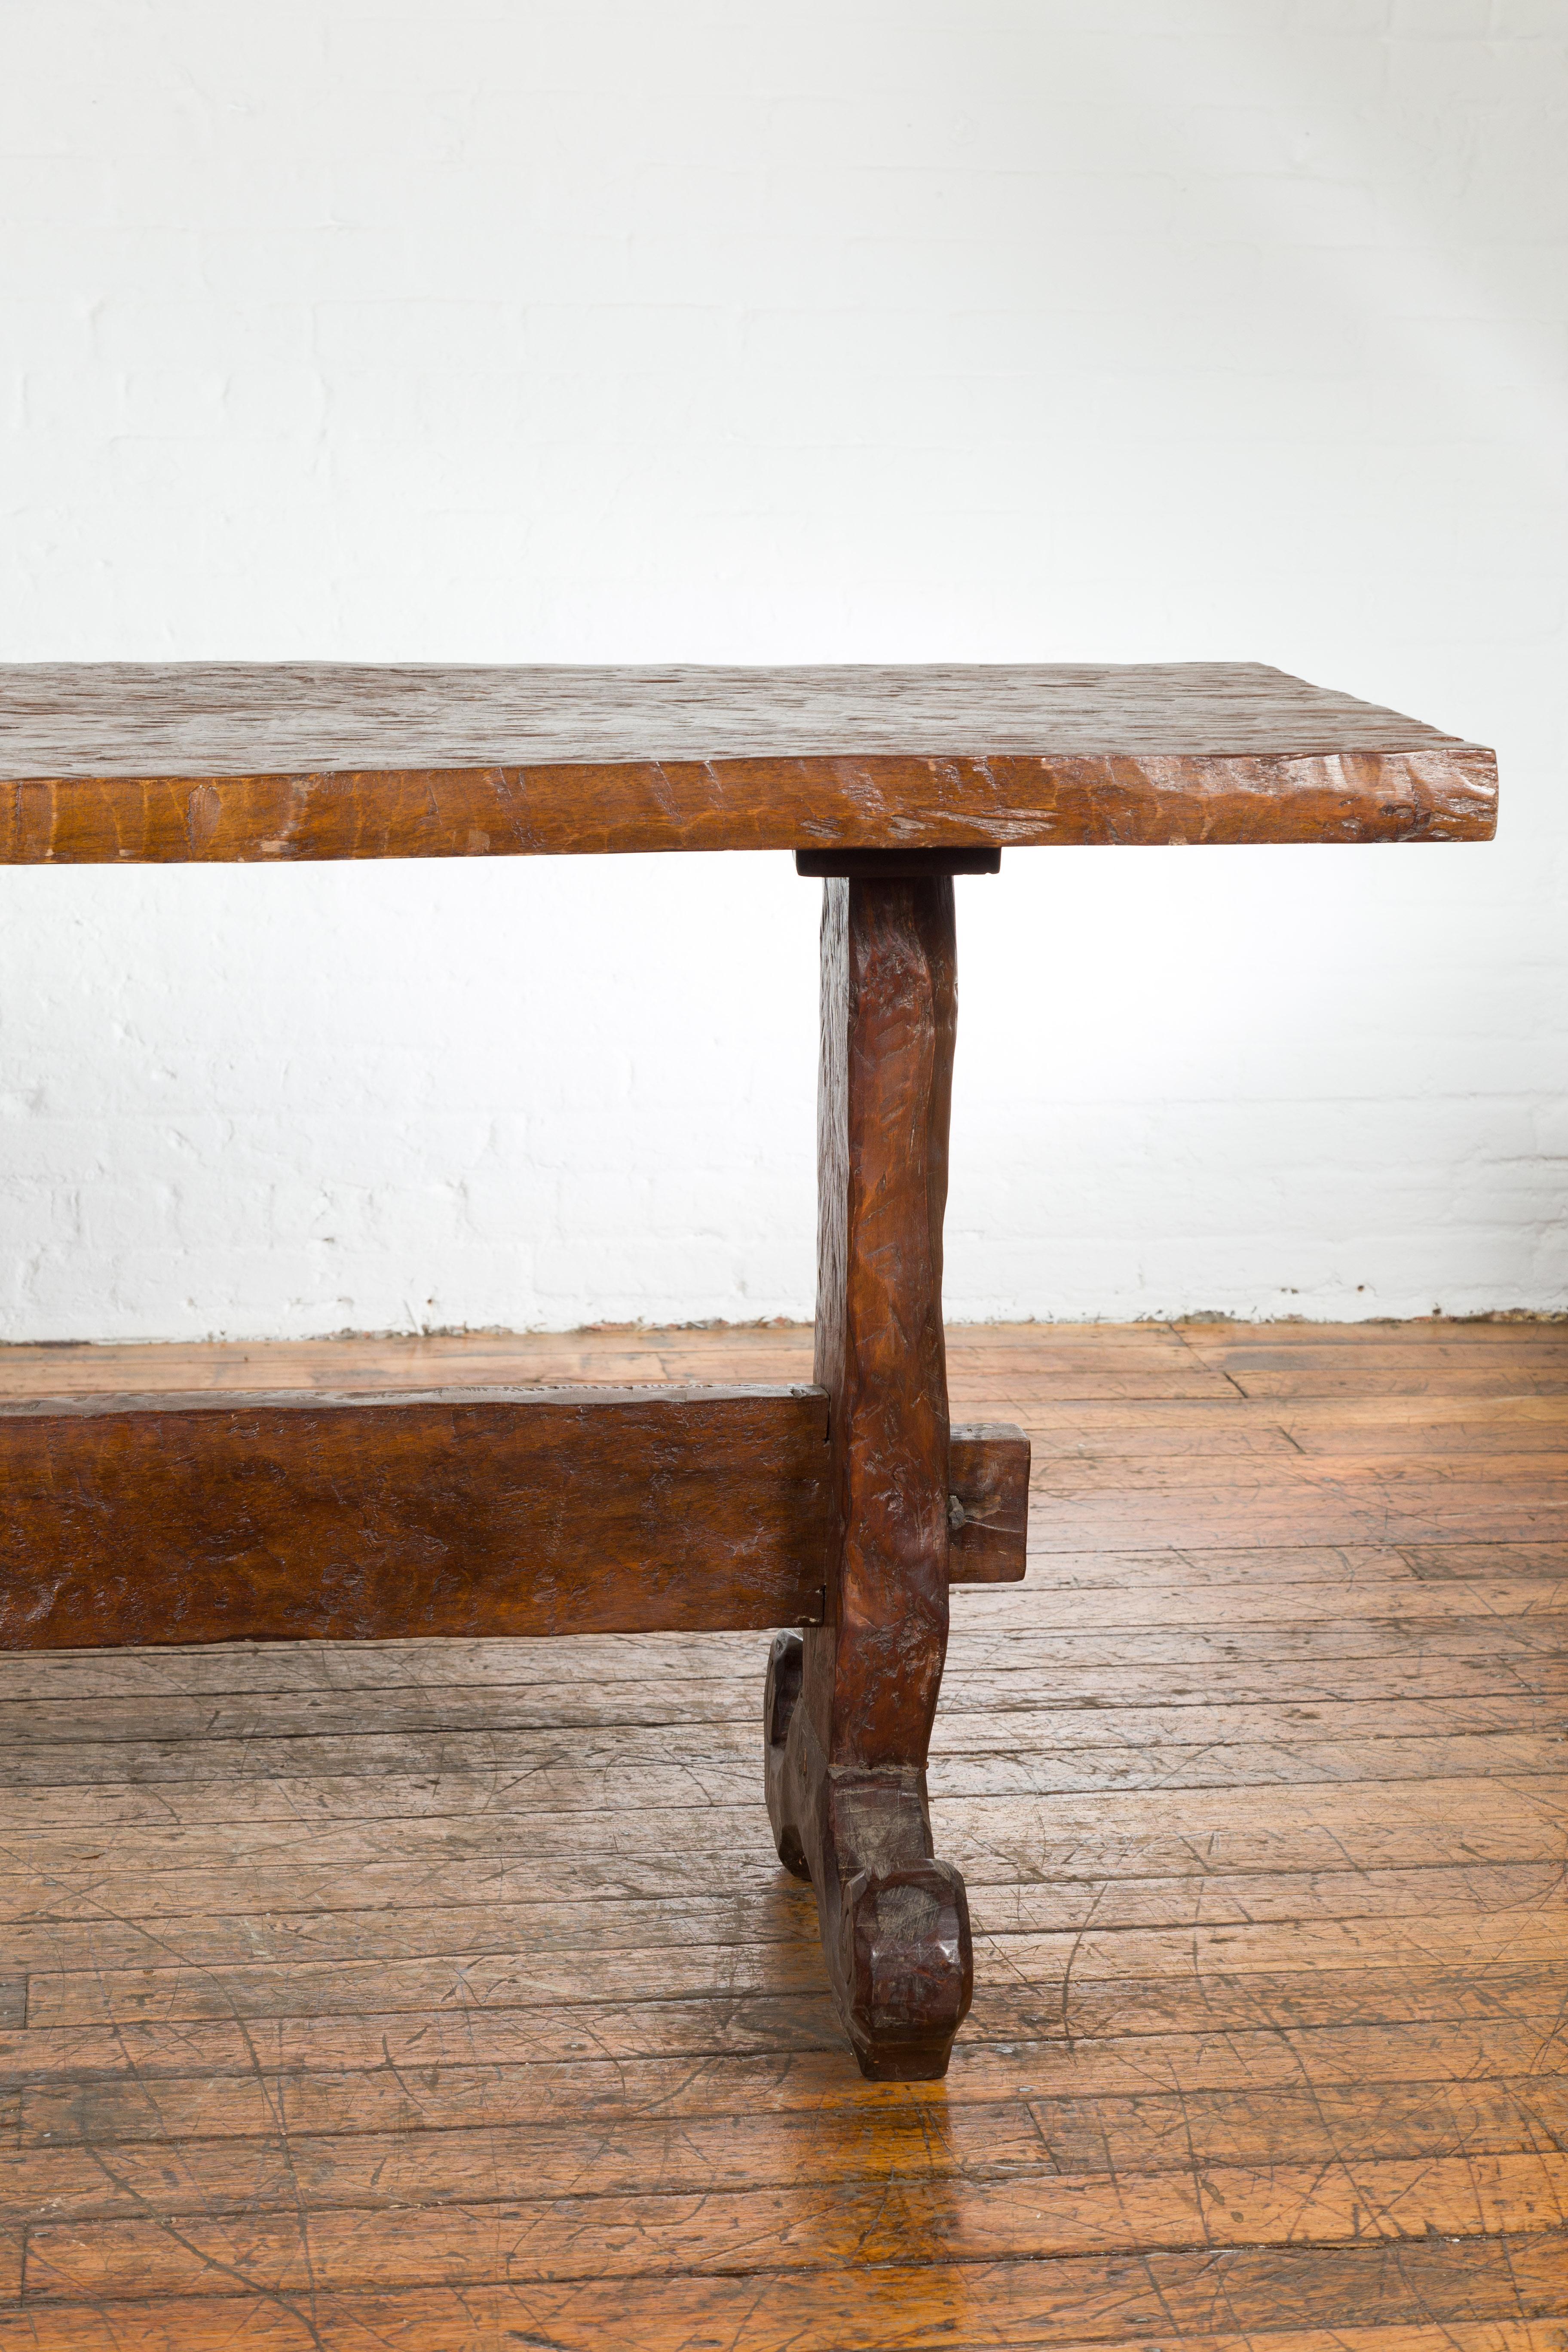 Carved 19th Century Javanese Wood Console Table with Trestle Base and Rustic Character